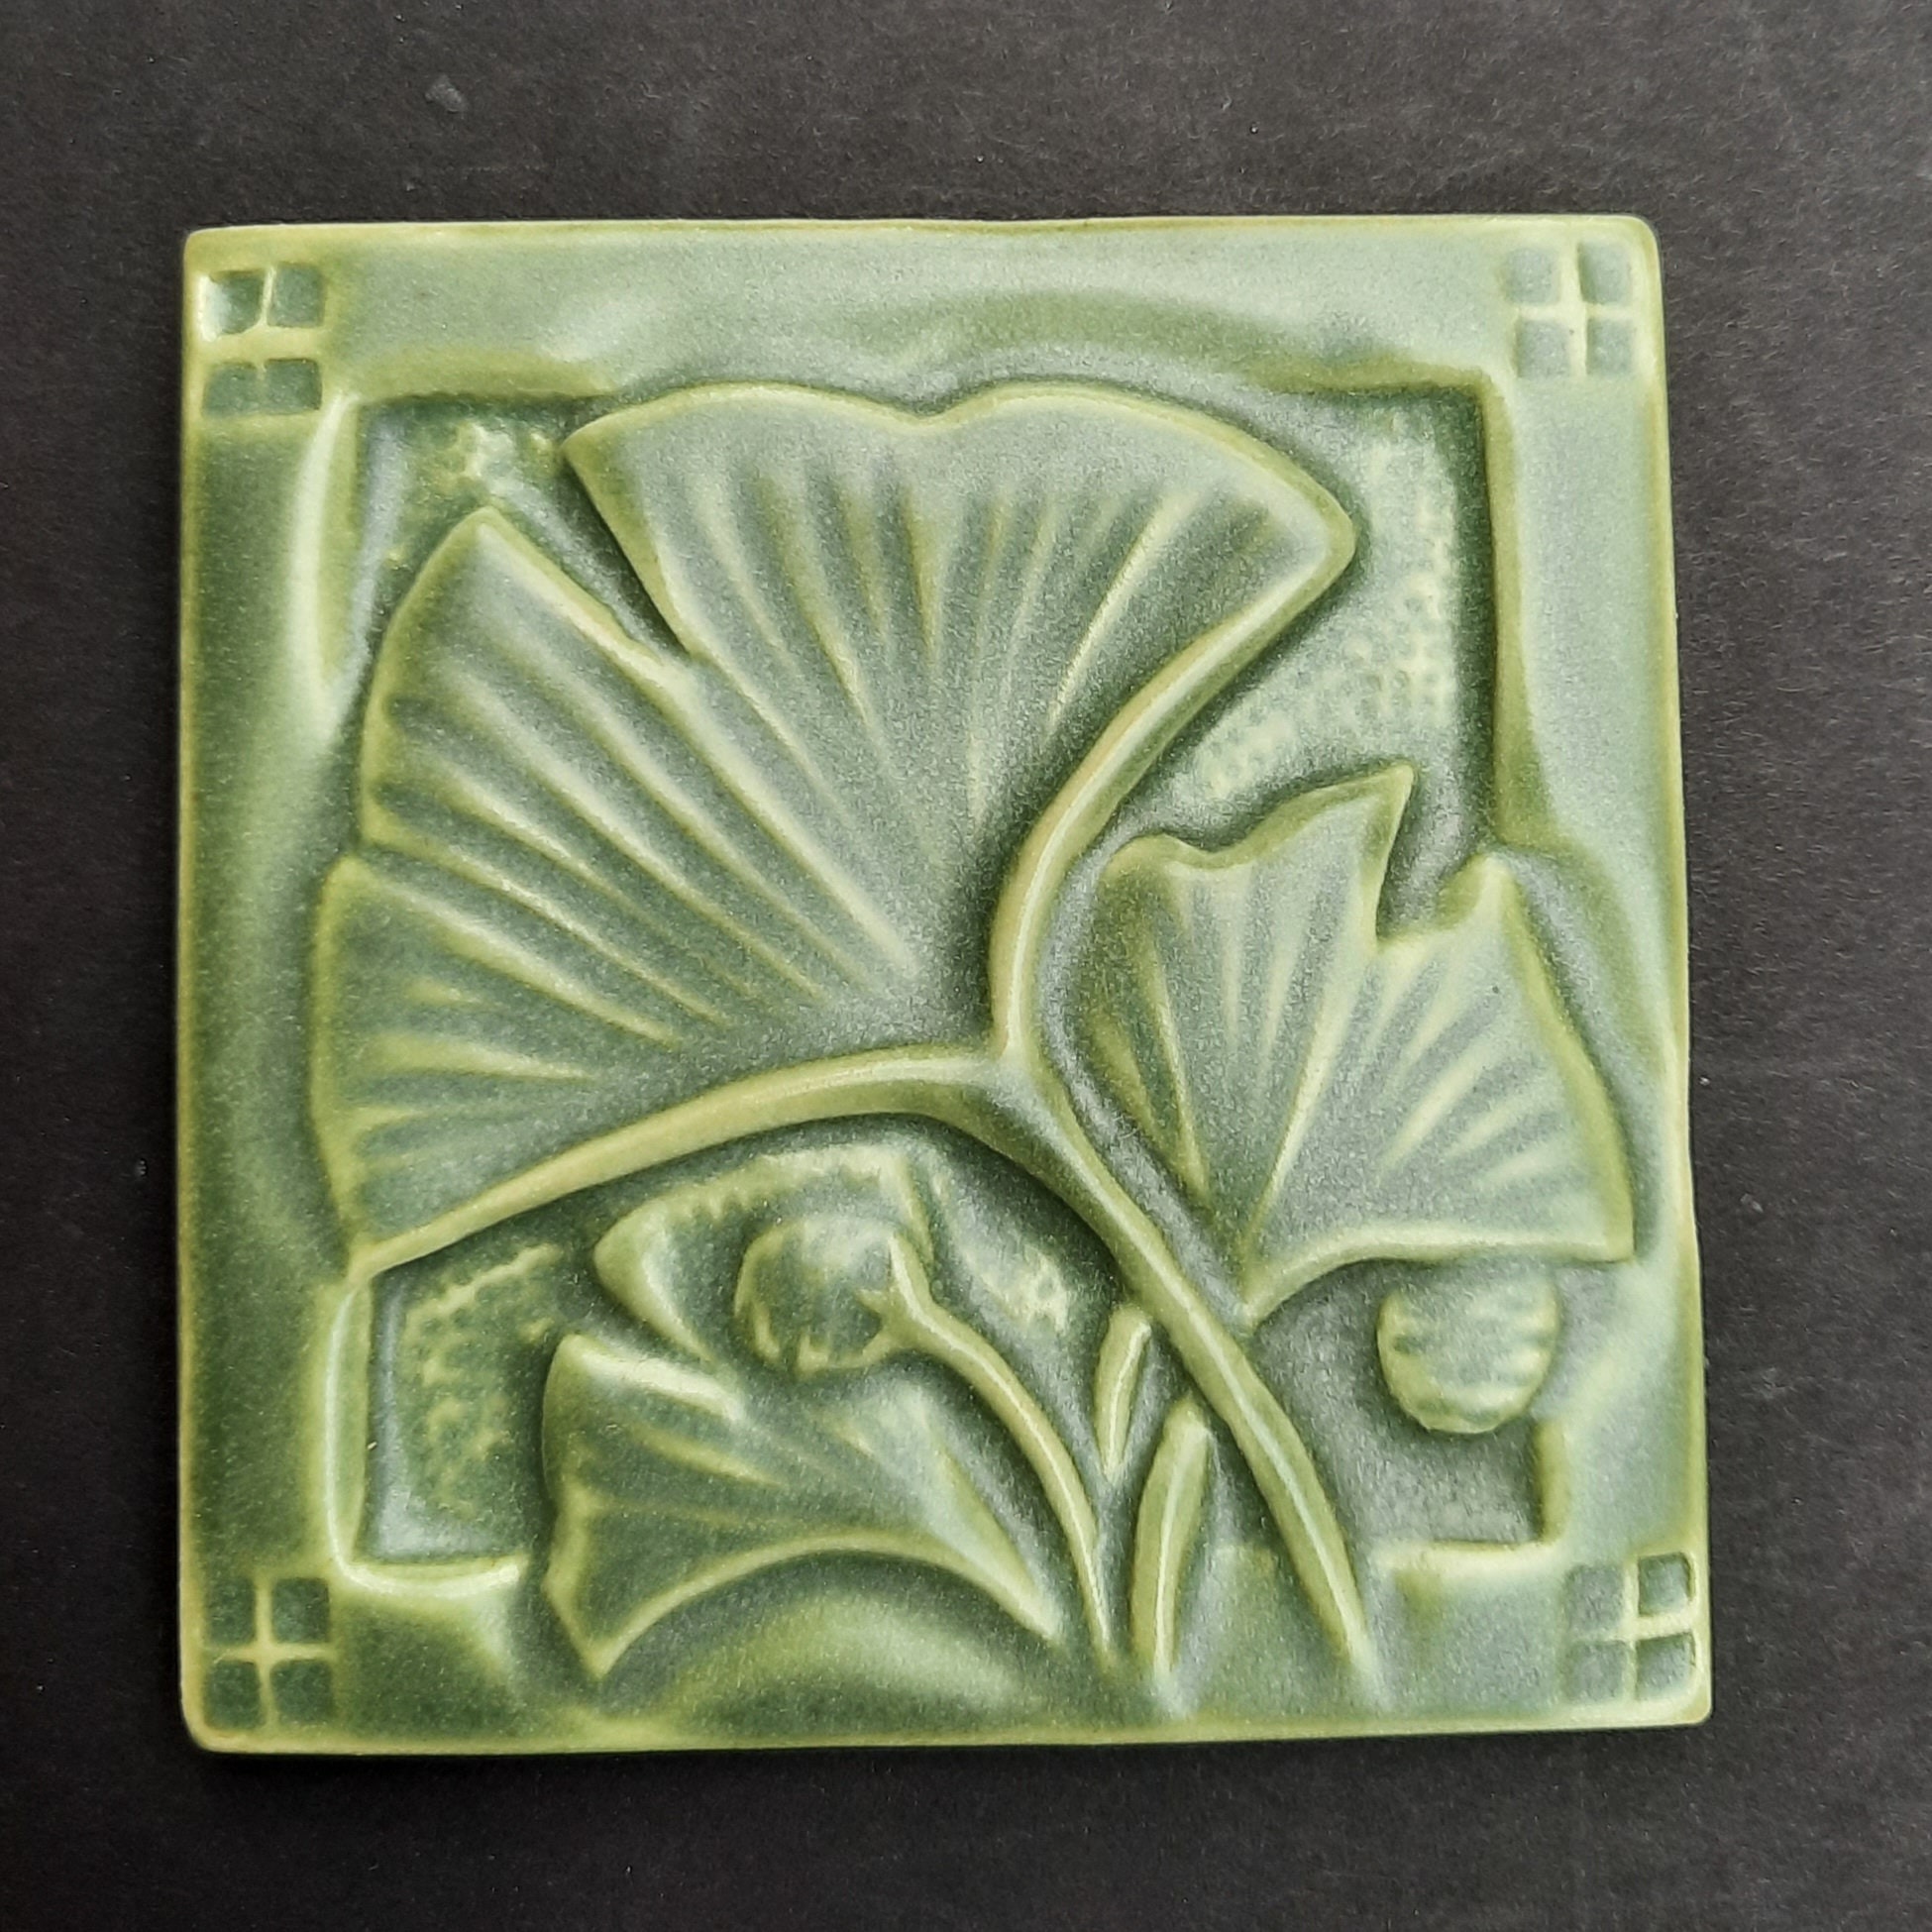 Ginkgo Tile, Arts and Crafts Style, Craftsman Decor, Mission Style 